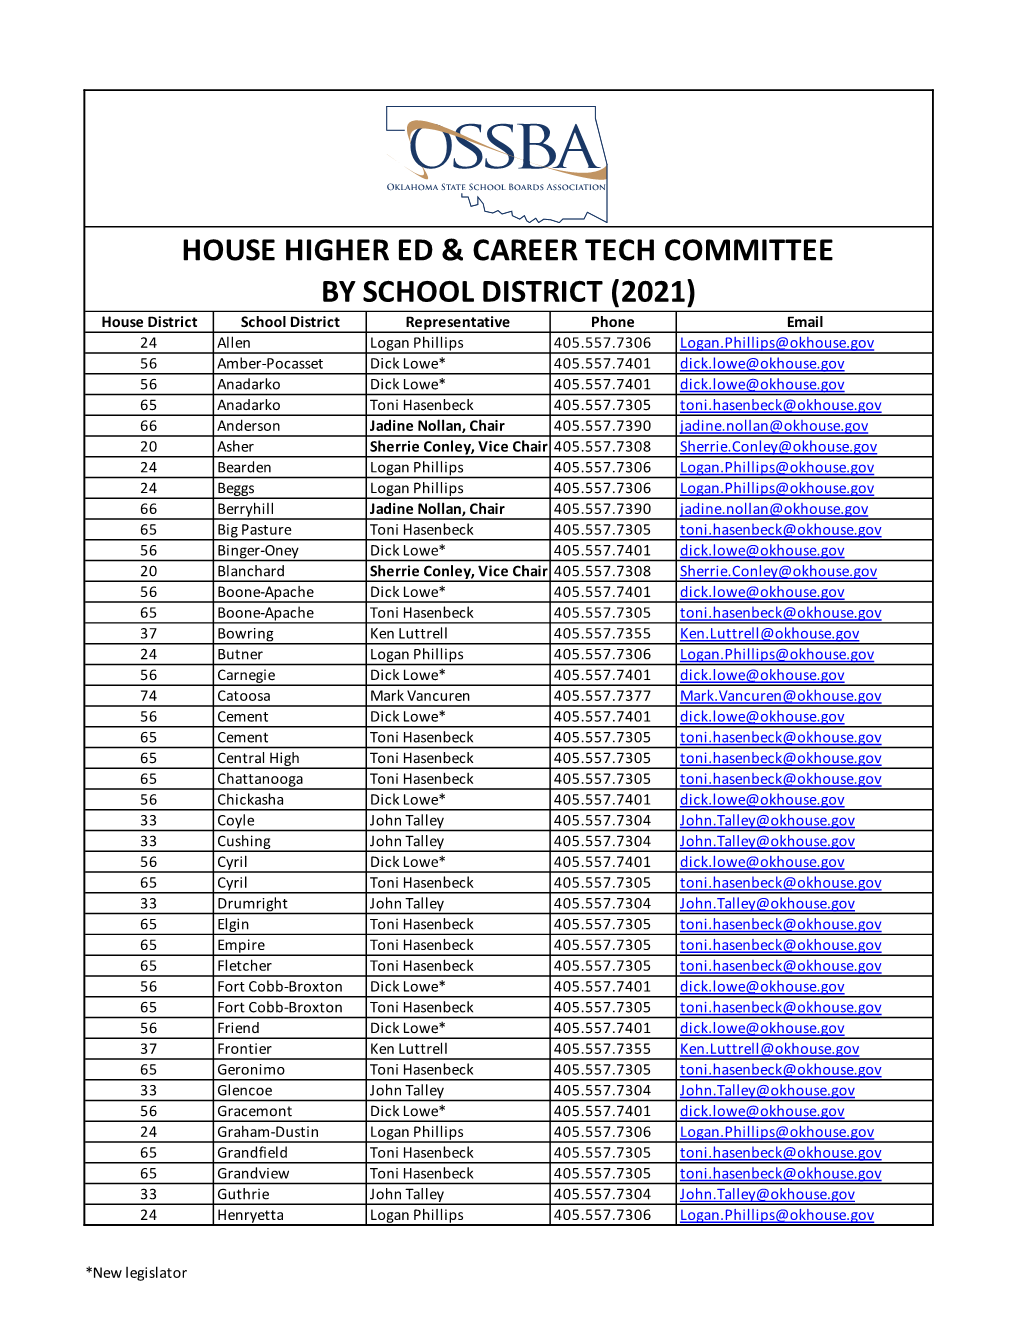 Representatives on the House Higher Education and Career Tech